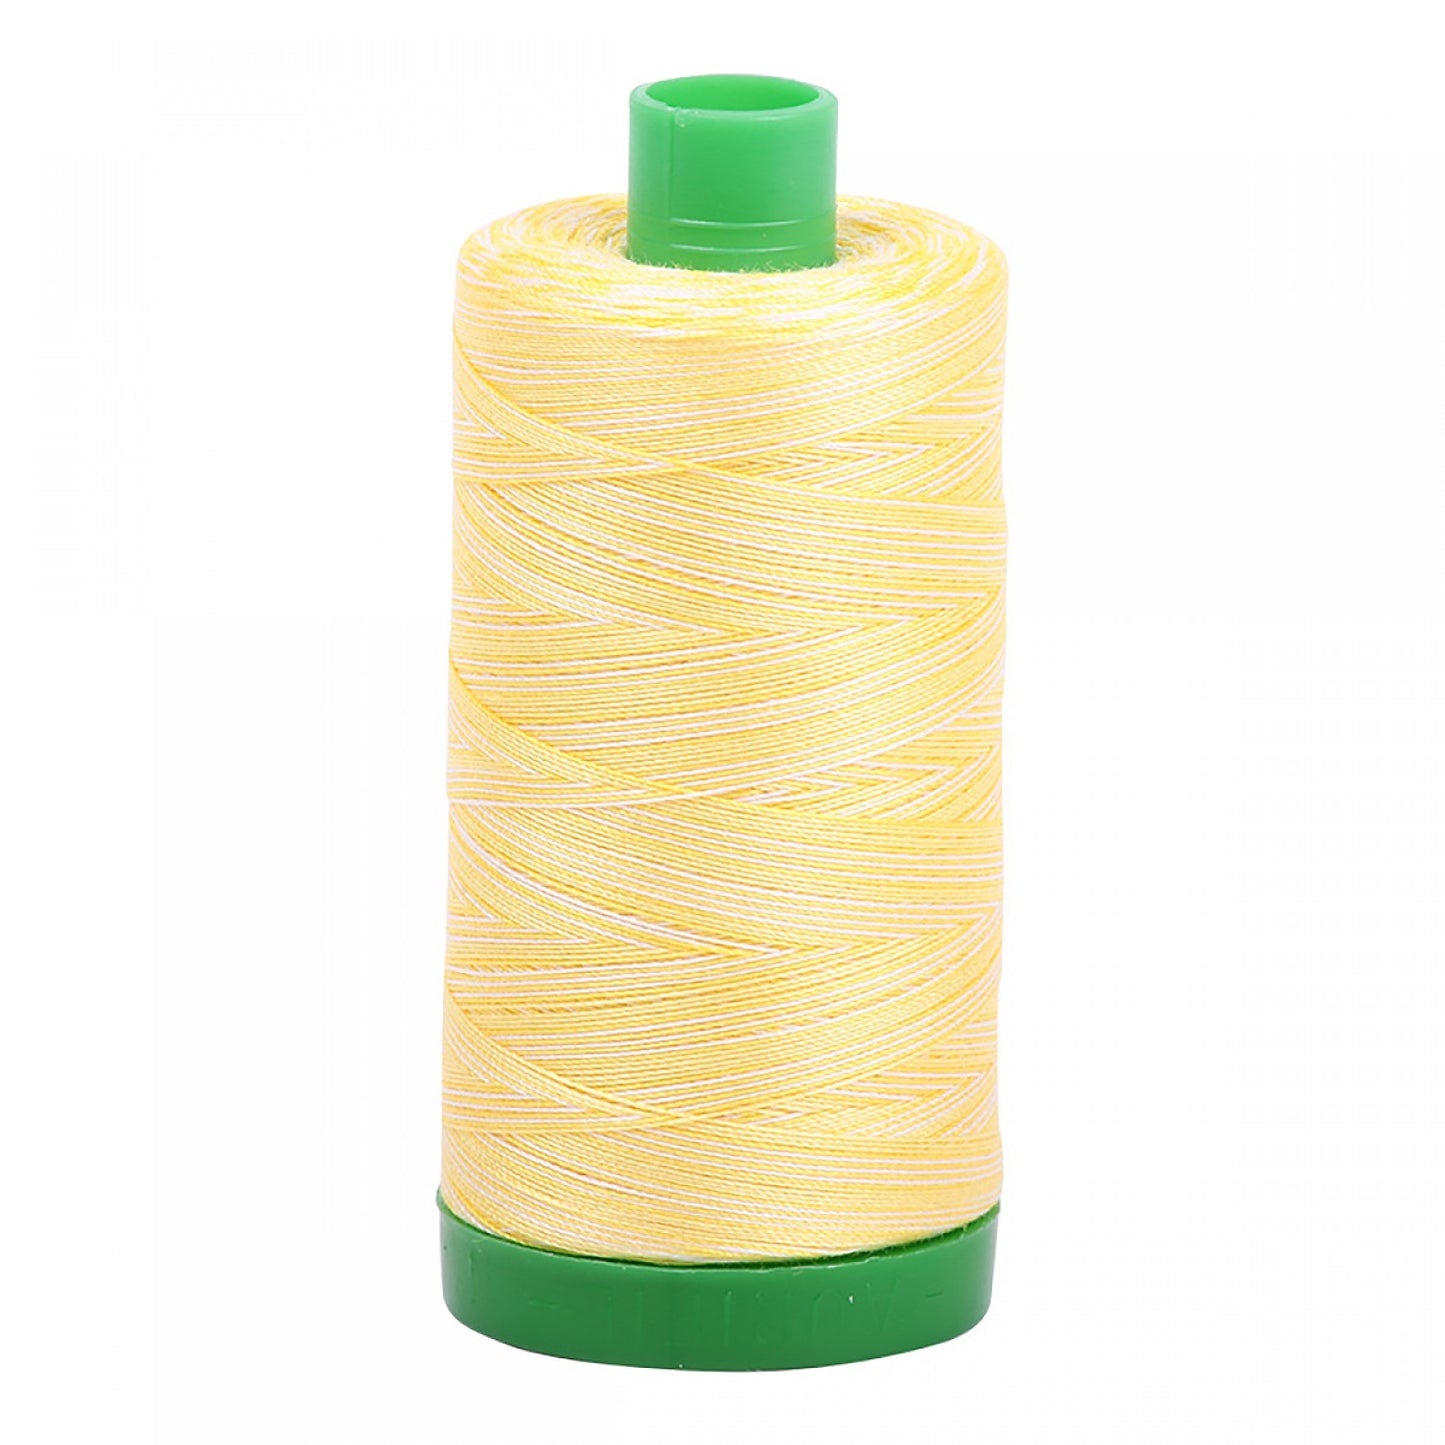 A1140-3910 Mako Cotton Embroidery Thread 40wt 1094yds Variegated Yellow